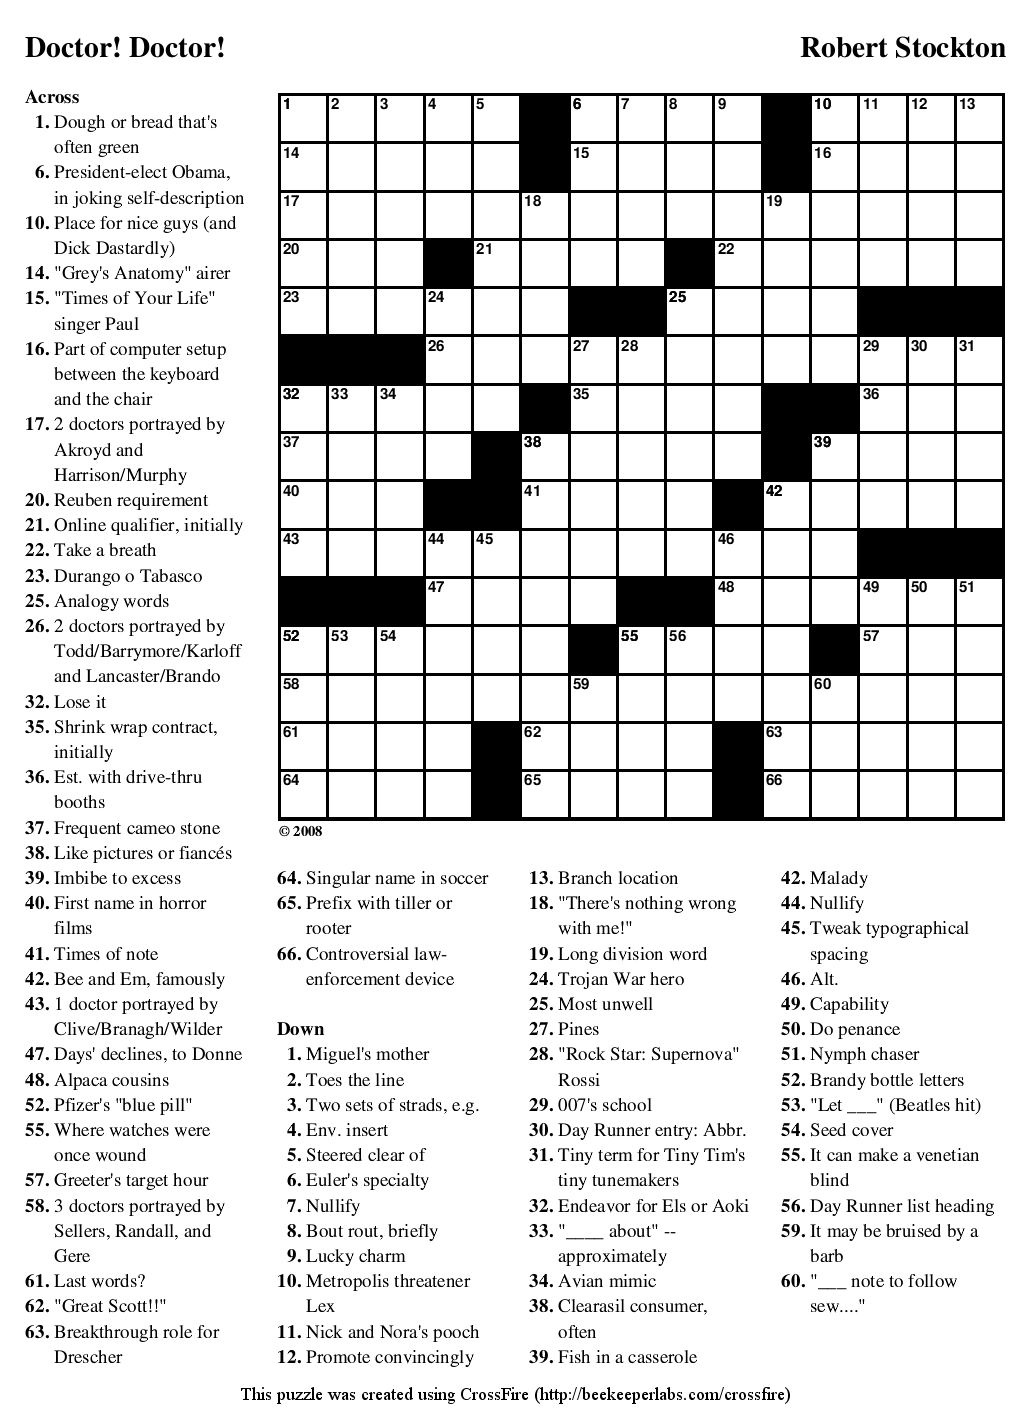 Crossword Puzzles Printable - Yahoo Image Search Results | Crossword - Printable Crossword Puzzles 2017